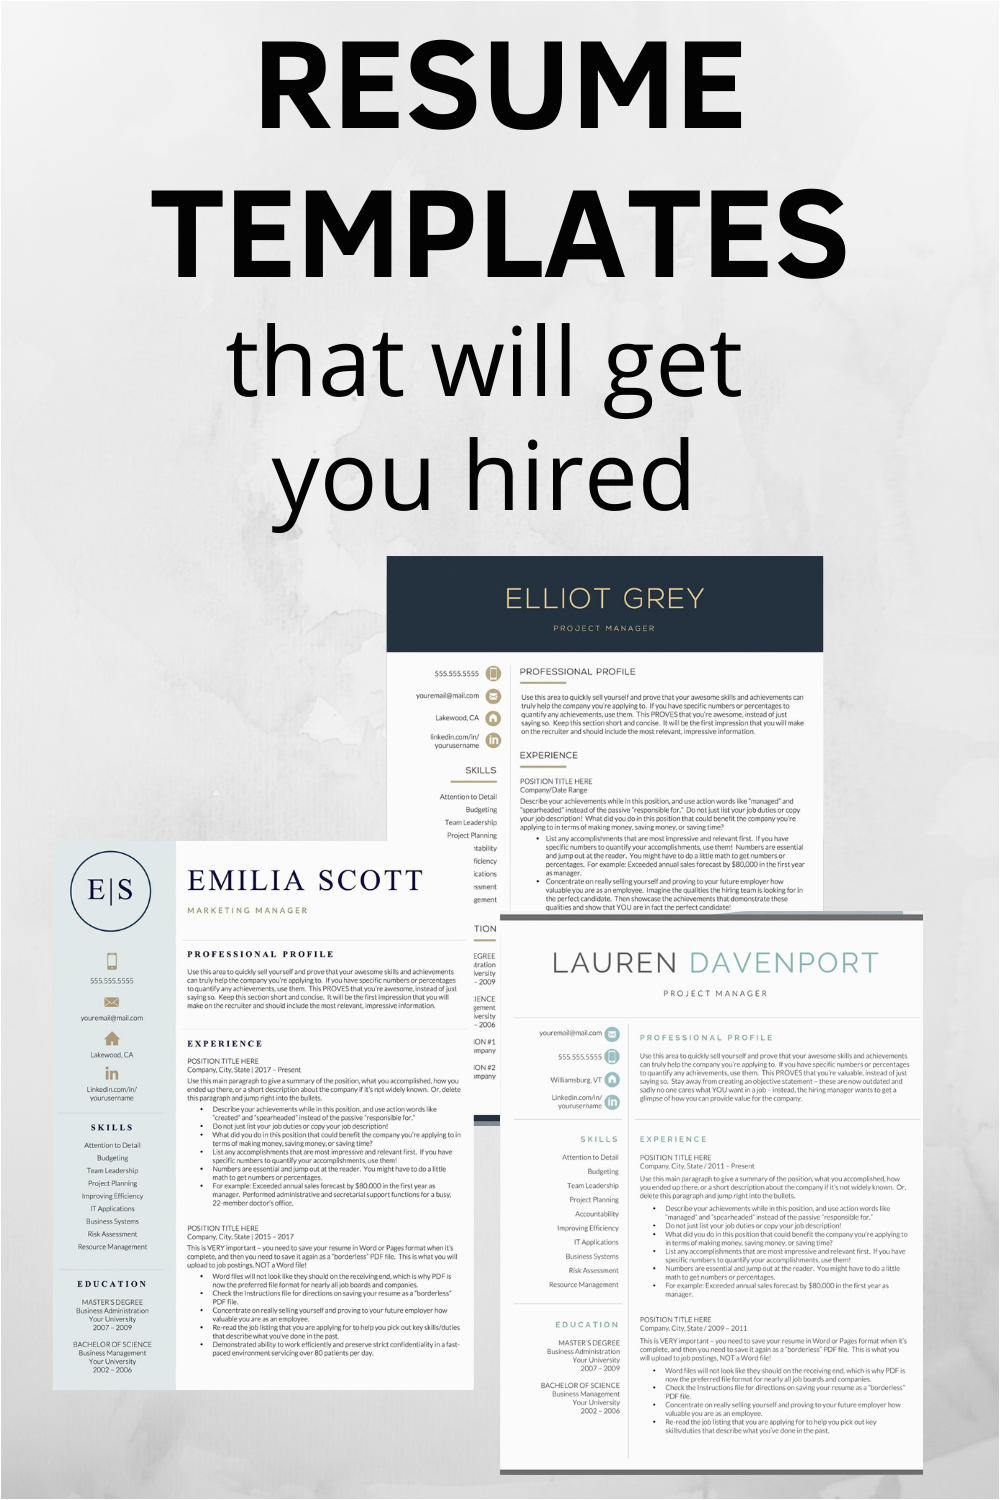 Best Resume Template to Get Hired the Best Resume Examples that Will Get You Hired In 2020